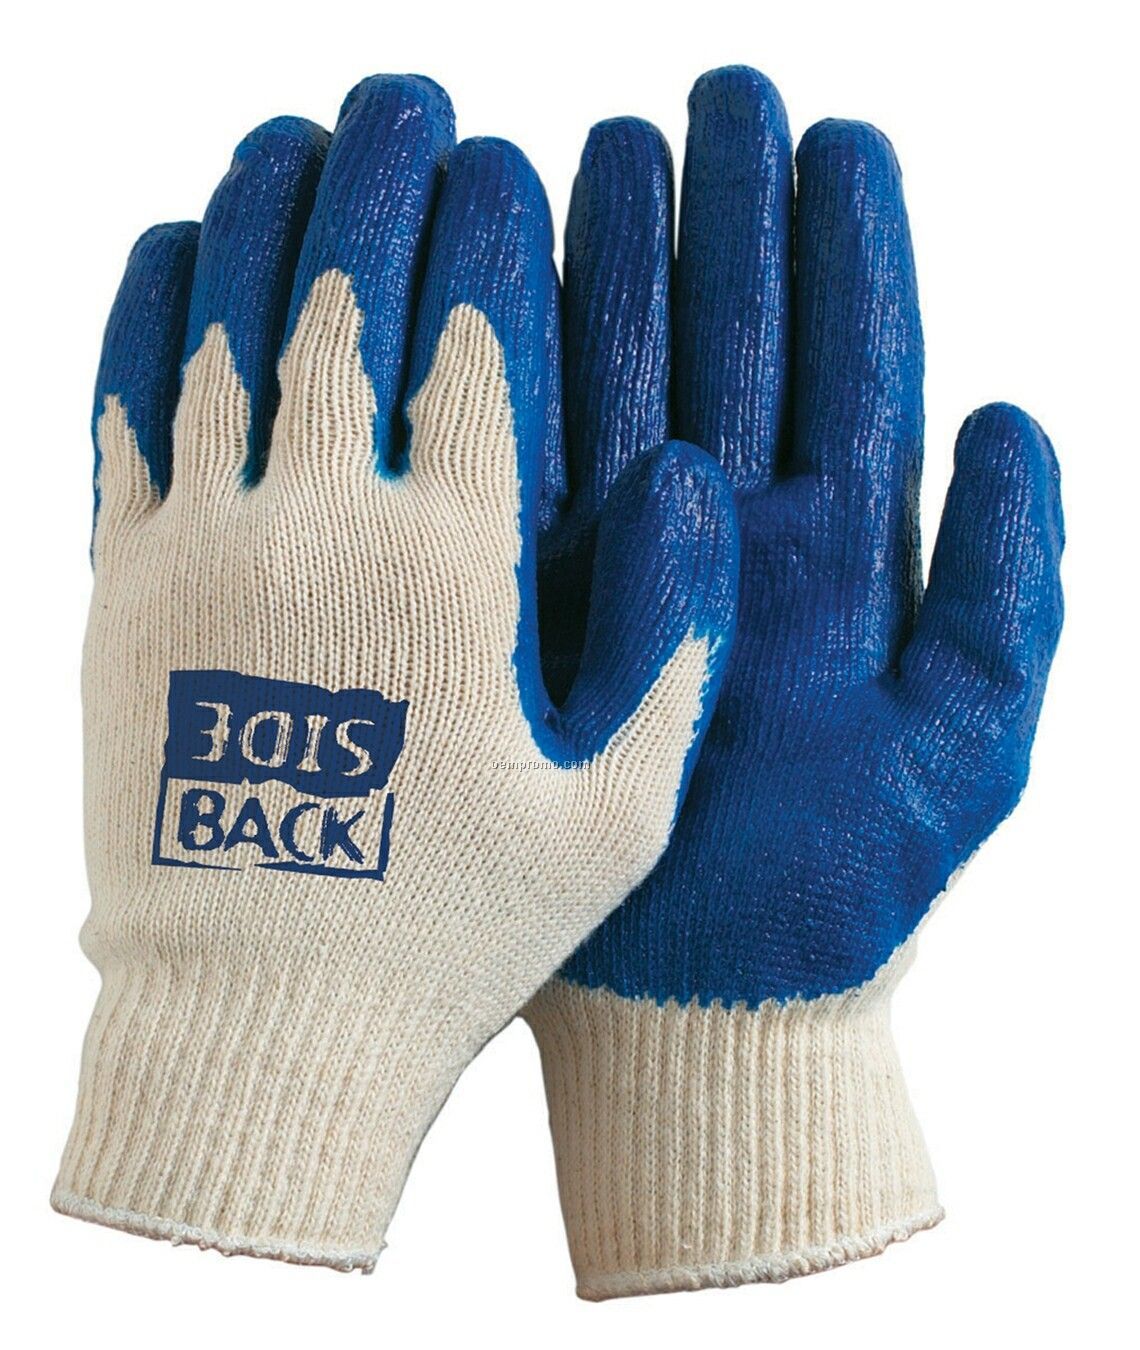 Cotton Knit Glove With Pvc Dipped Palm